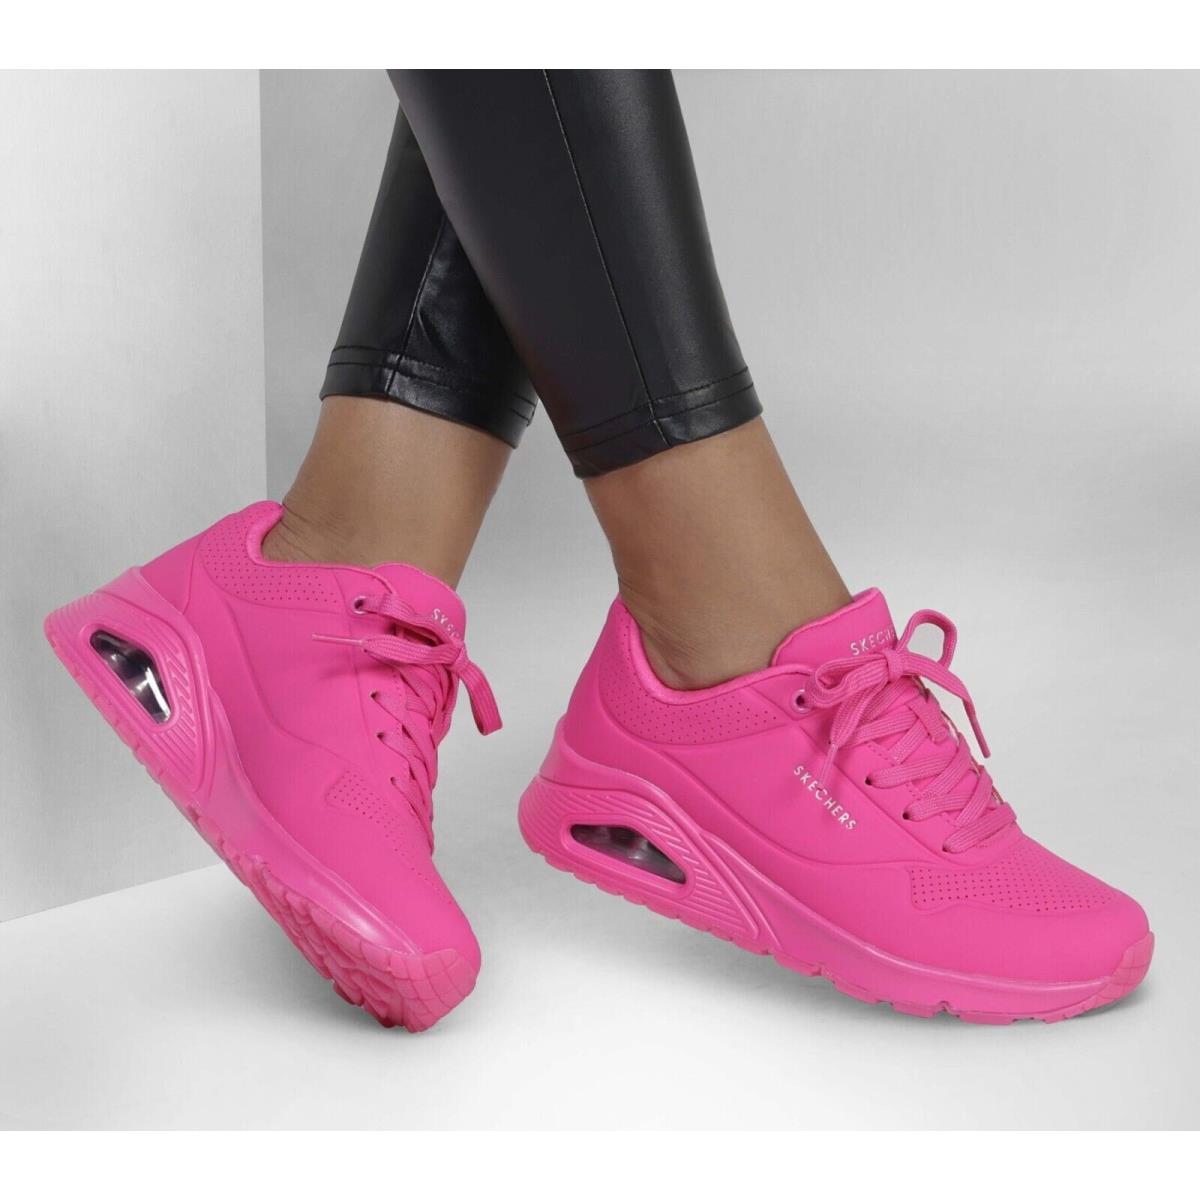 Skechers shoes Uno Night Shades - Hot Pink 12